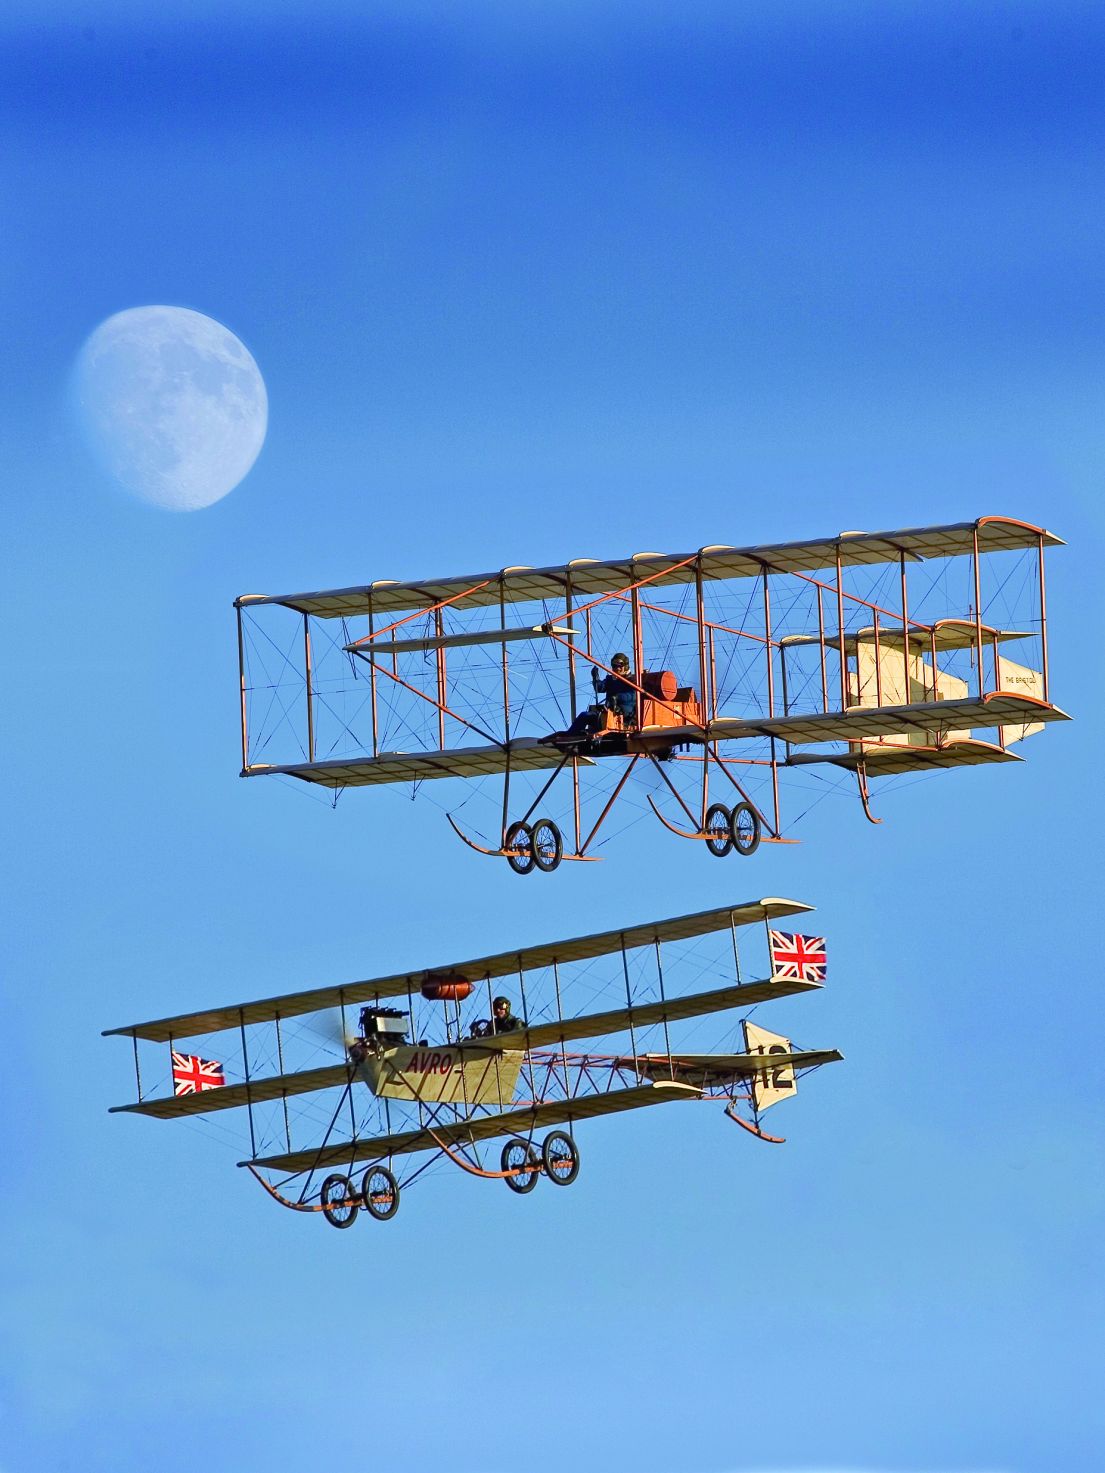 Two Edwardian Plans, made from wood and cloth, flying one on top of the other through a blue sky.